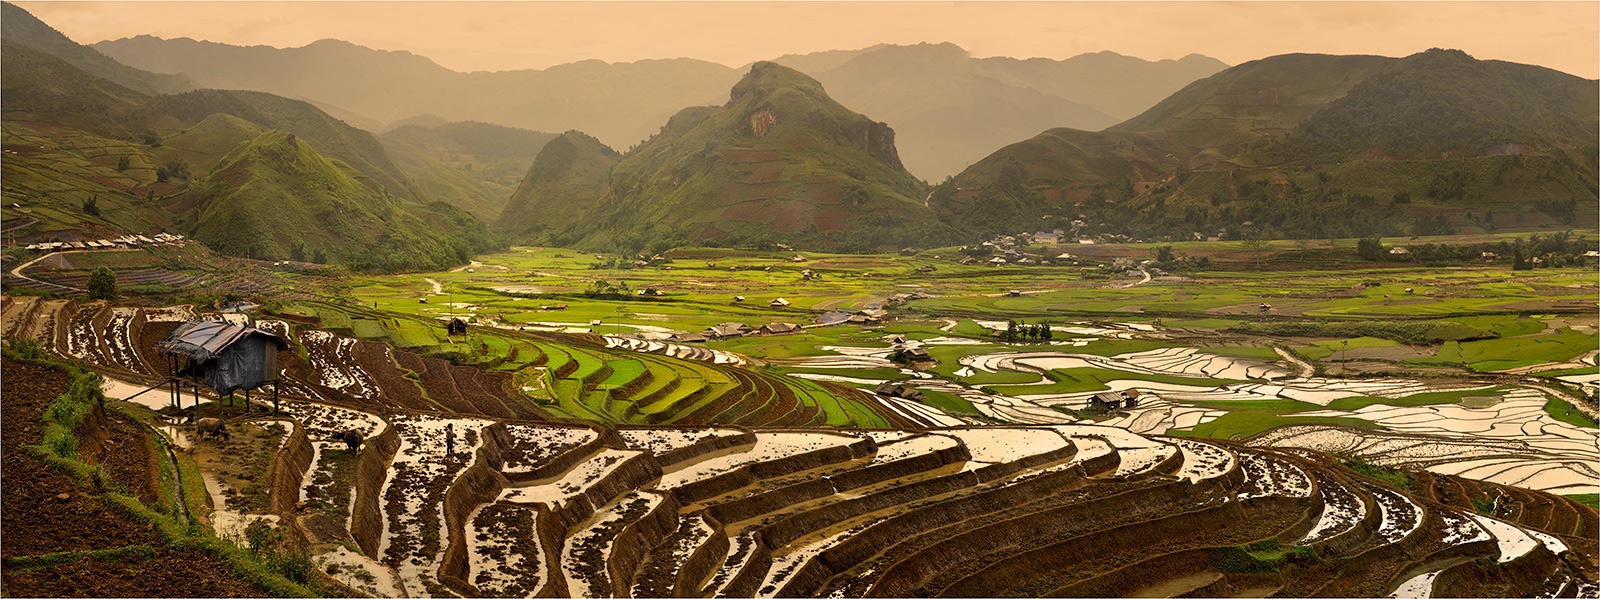 Landscapes by Yury Pustovoy rice fields of China